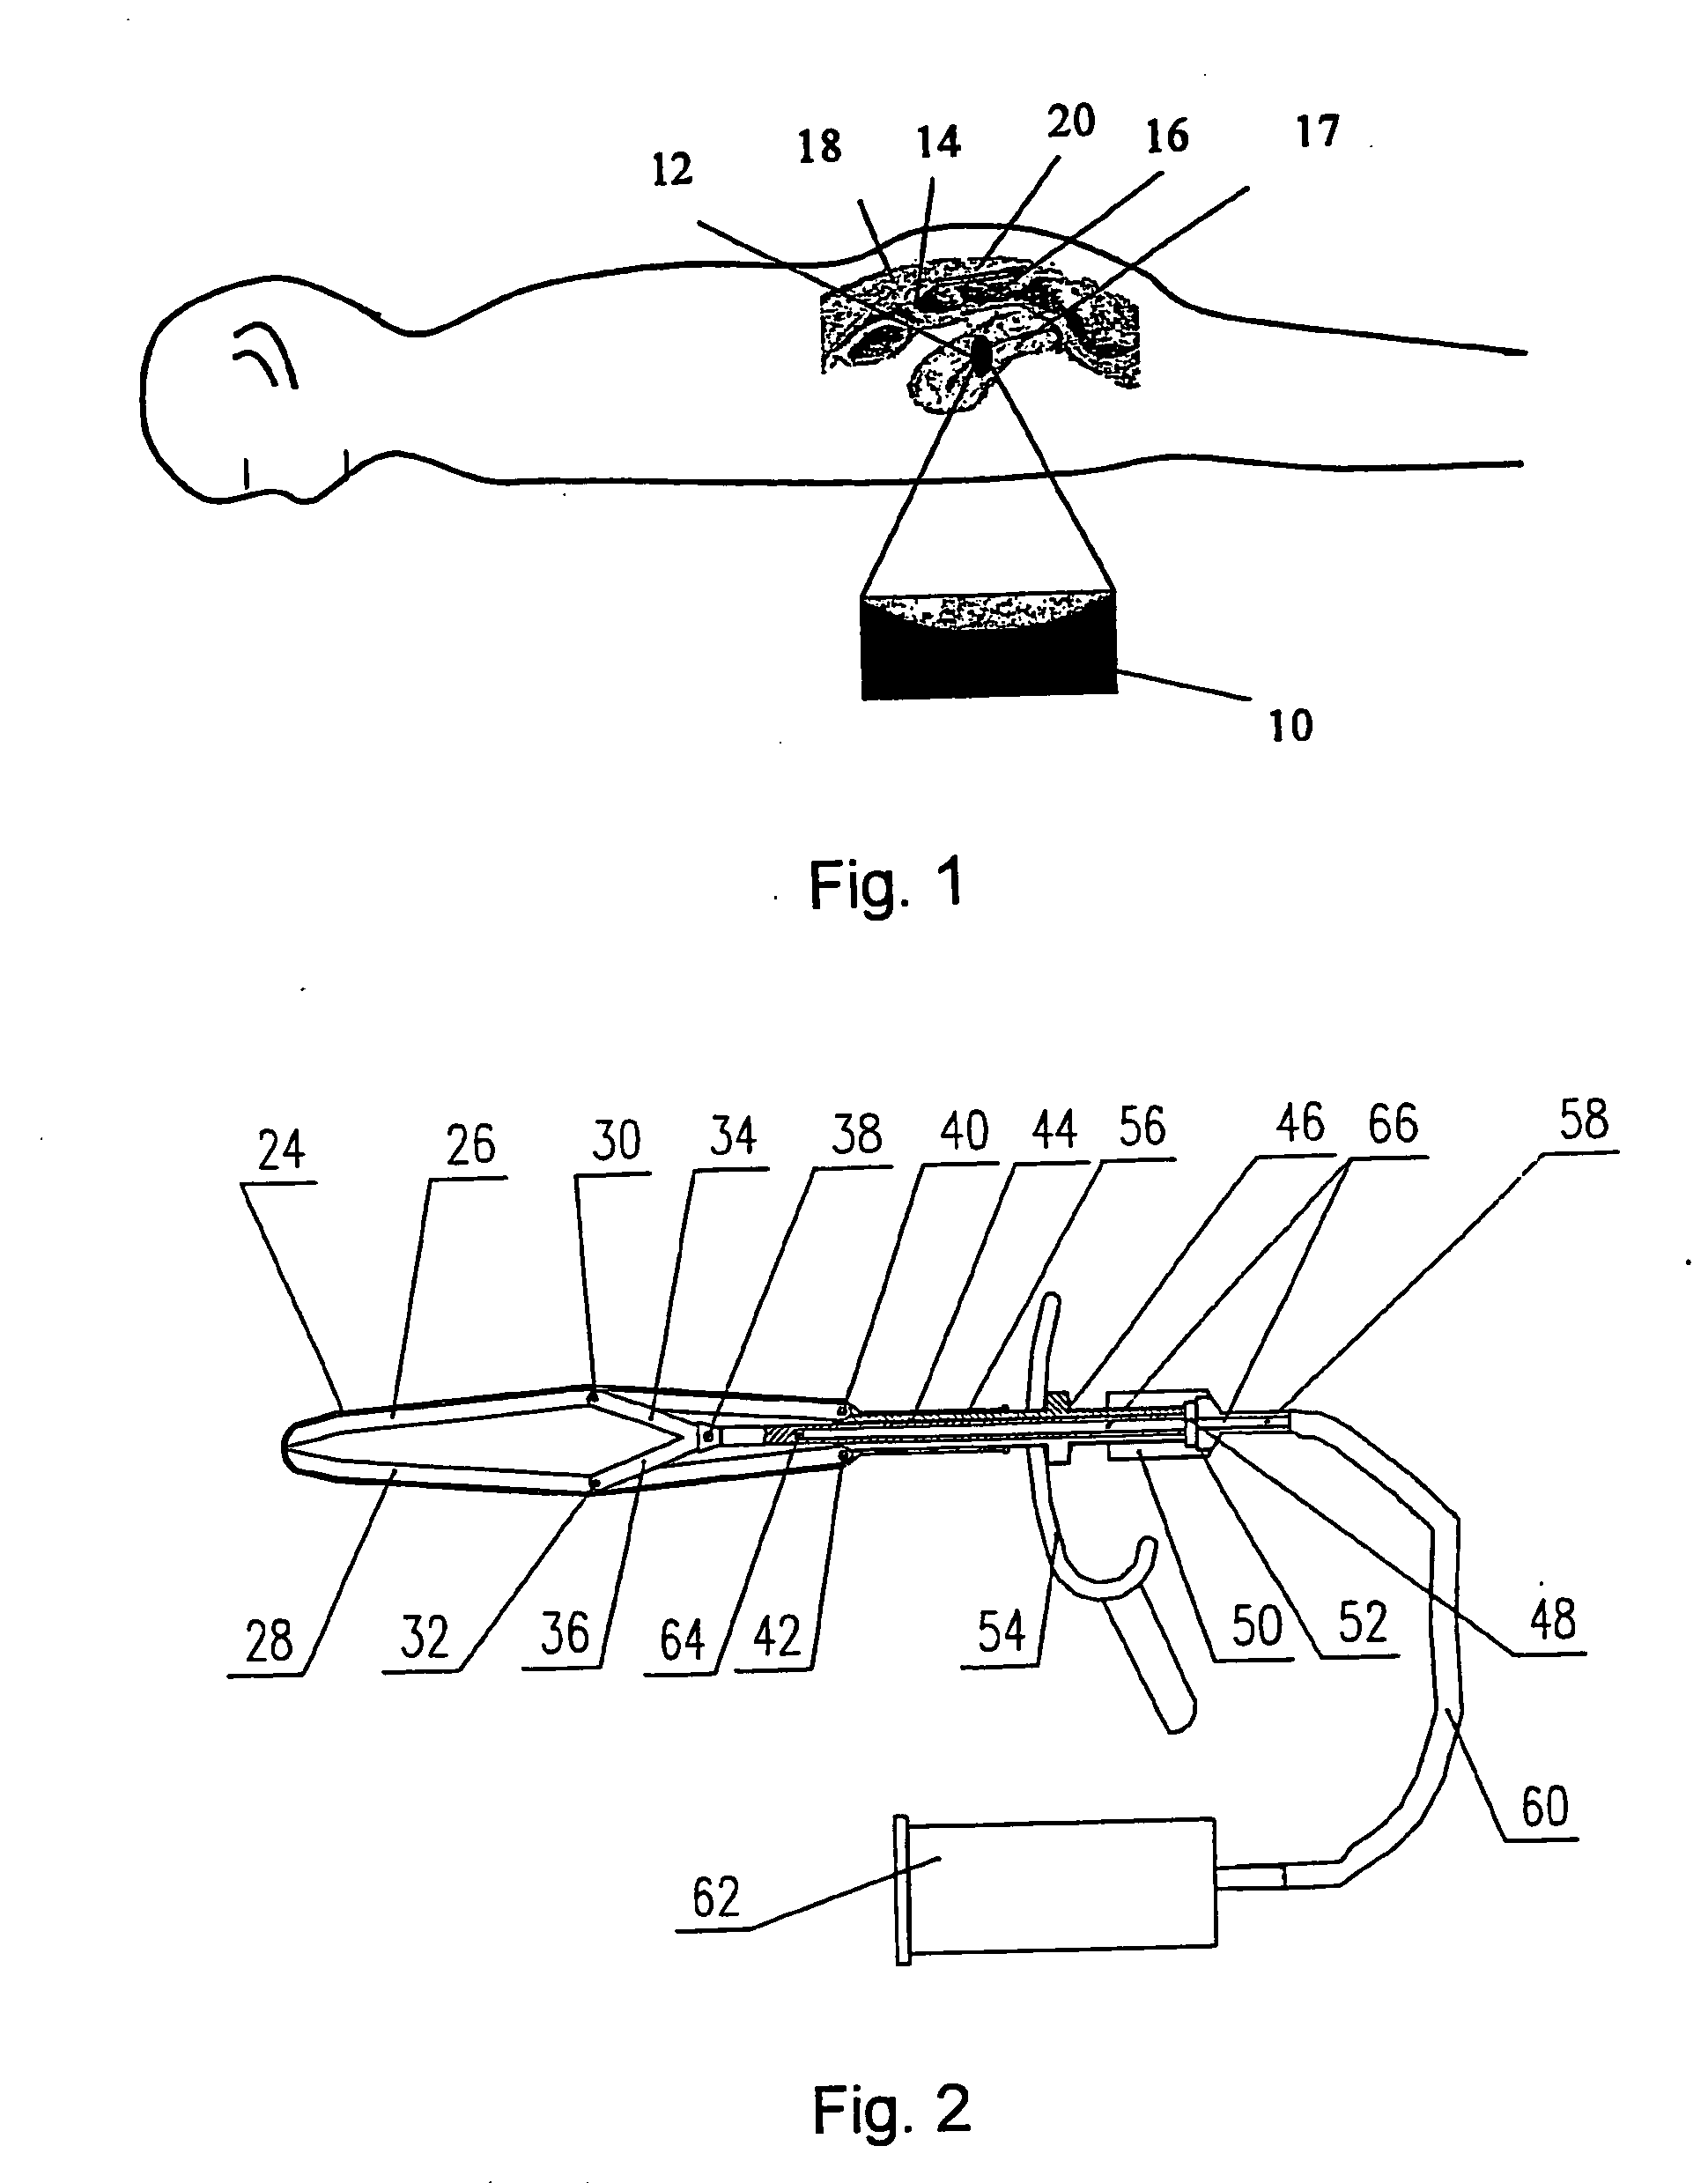 Apparatus for Body Cavity Delivery with Medium, Body Cavity Leading-in and Ultrasound Block